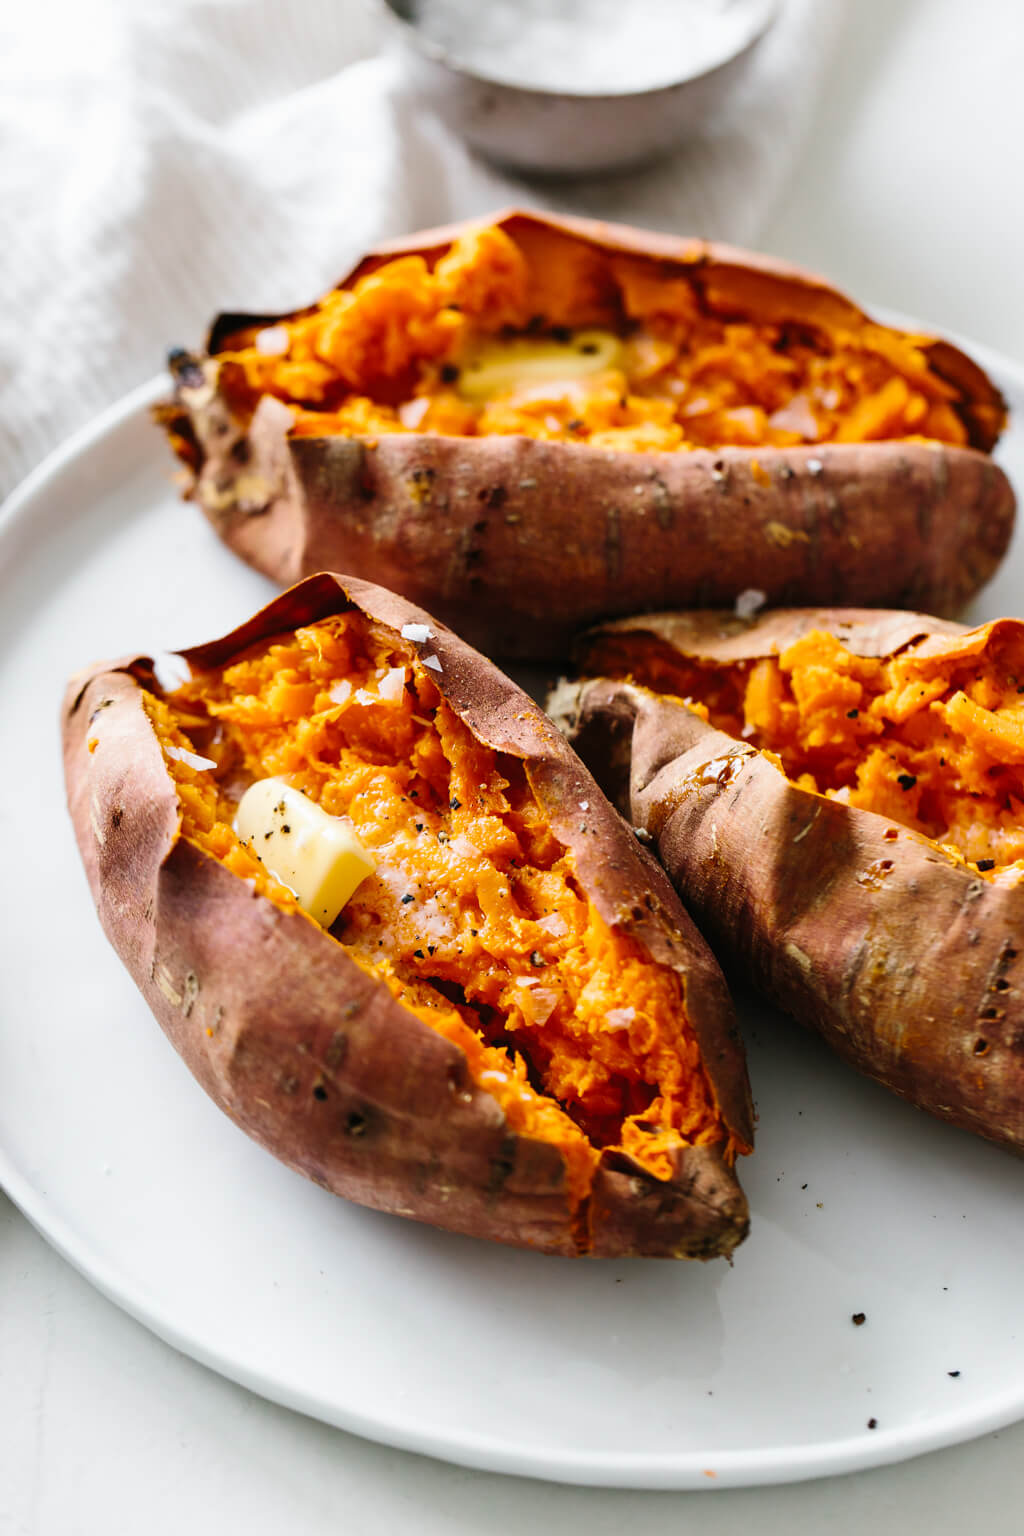 Baked sweet potato is a healthy side dish or main meal. Learn how to bake sweet potatoes in the oven perfectly. 